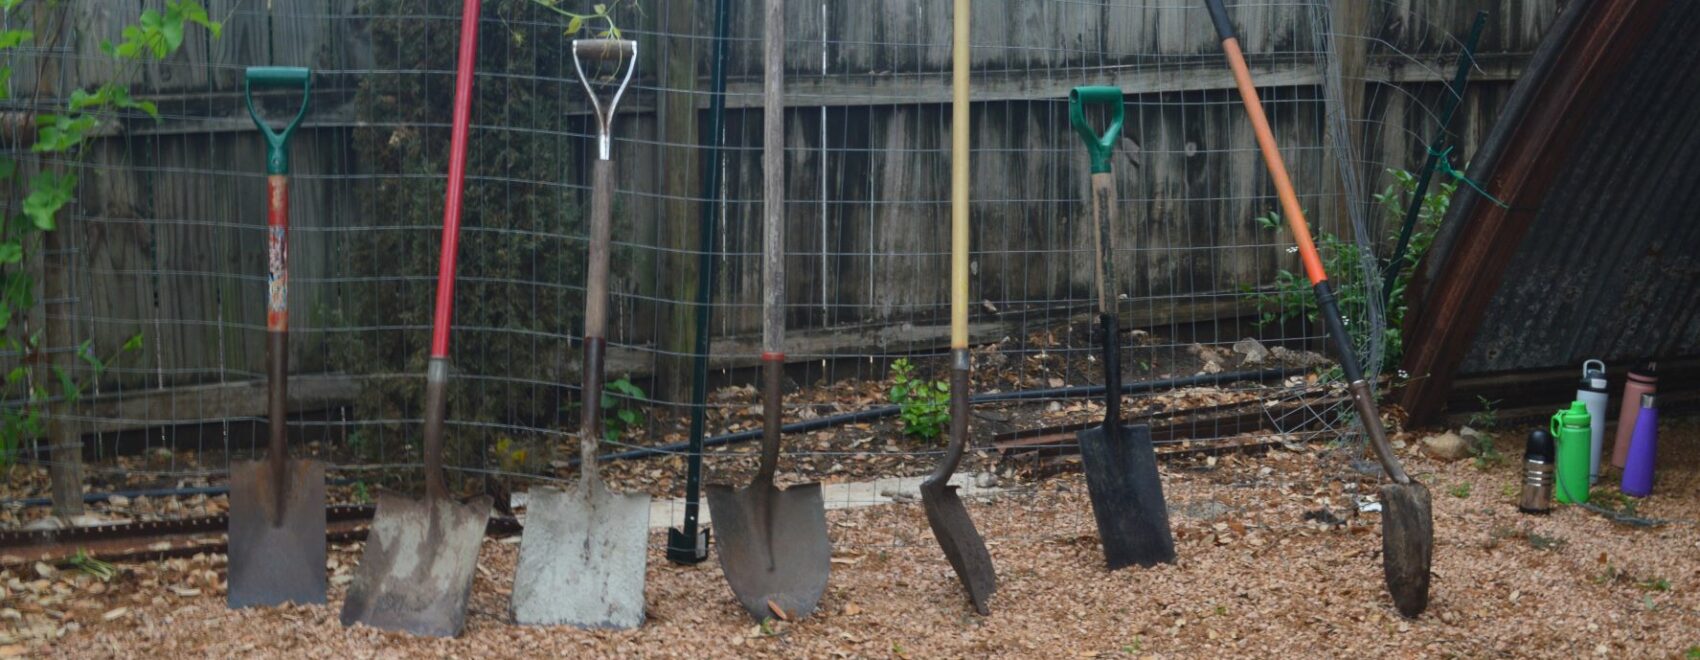 A line of shovels leaning against a wooden fence at The Eagle's Nest Community Garden at TecoloteSA.